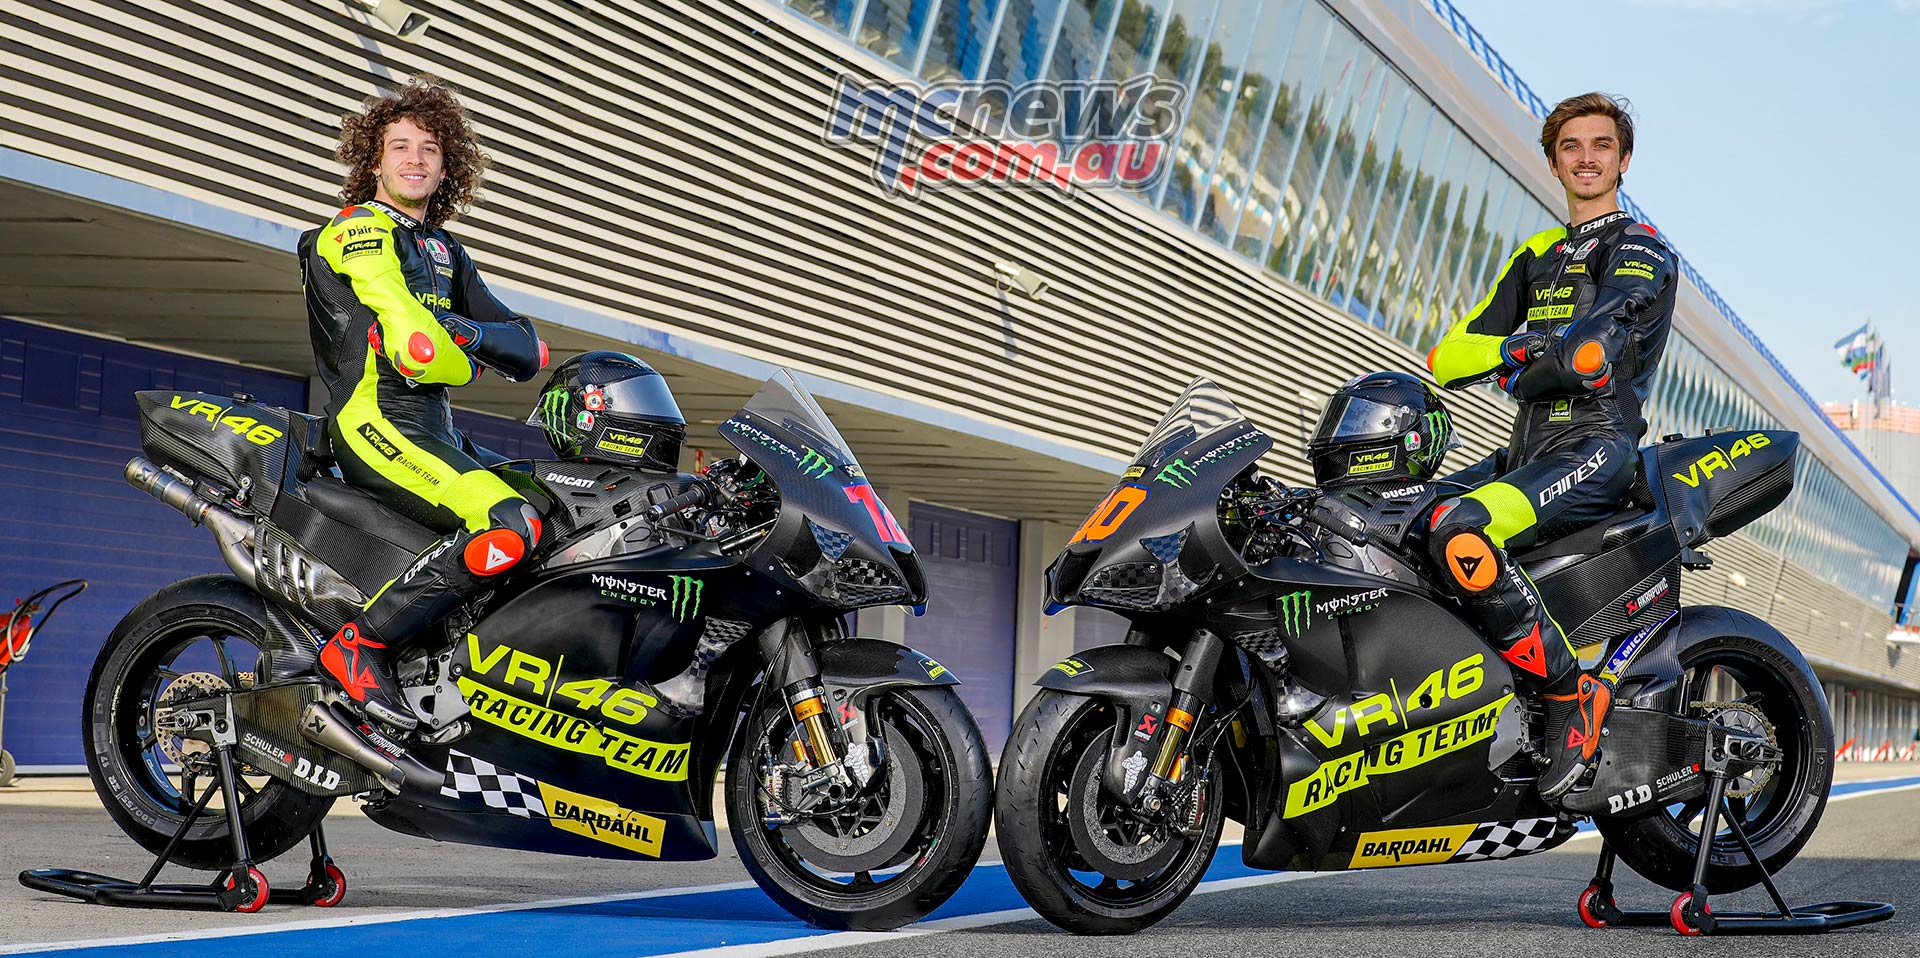 2022 MotoGP™: The search for perfection starts here